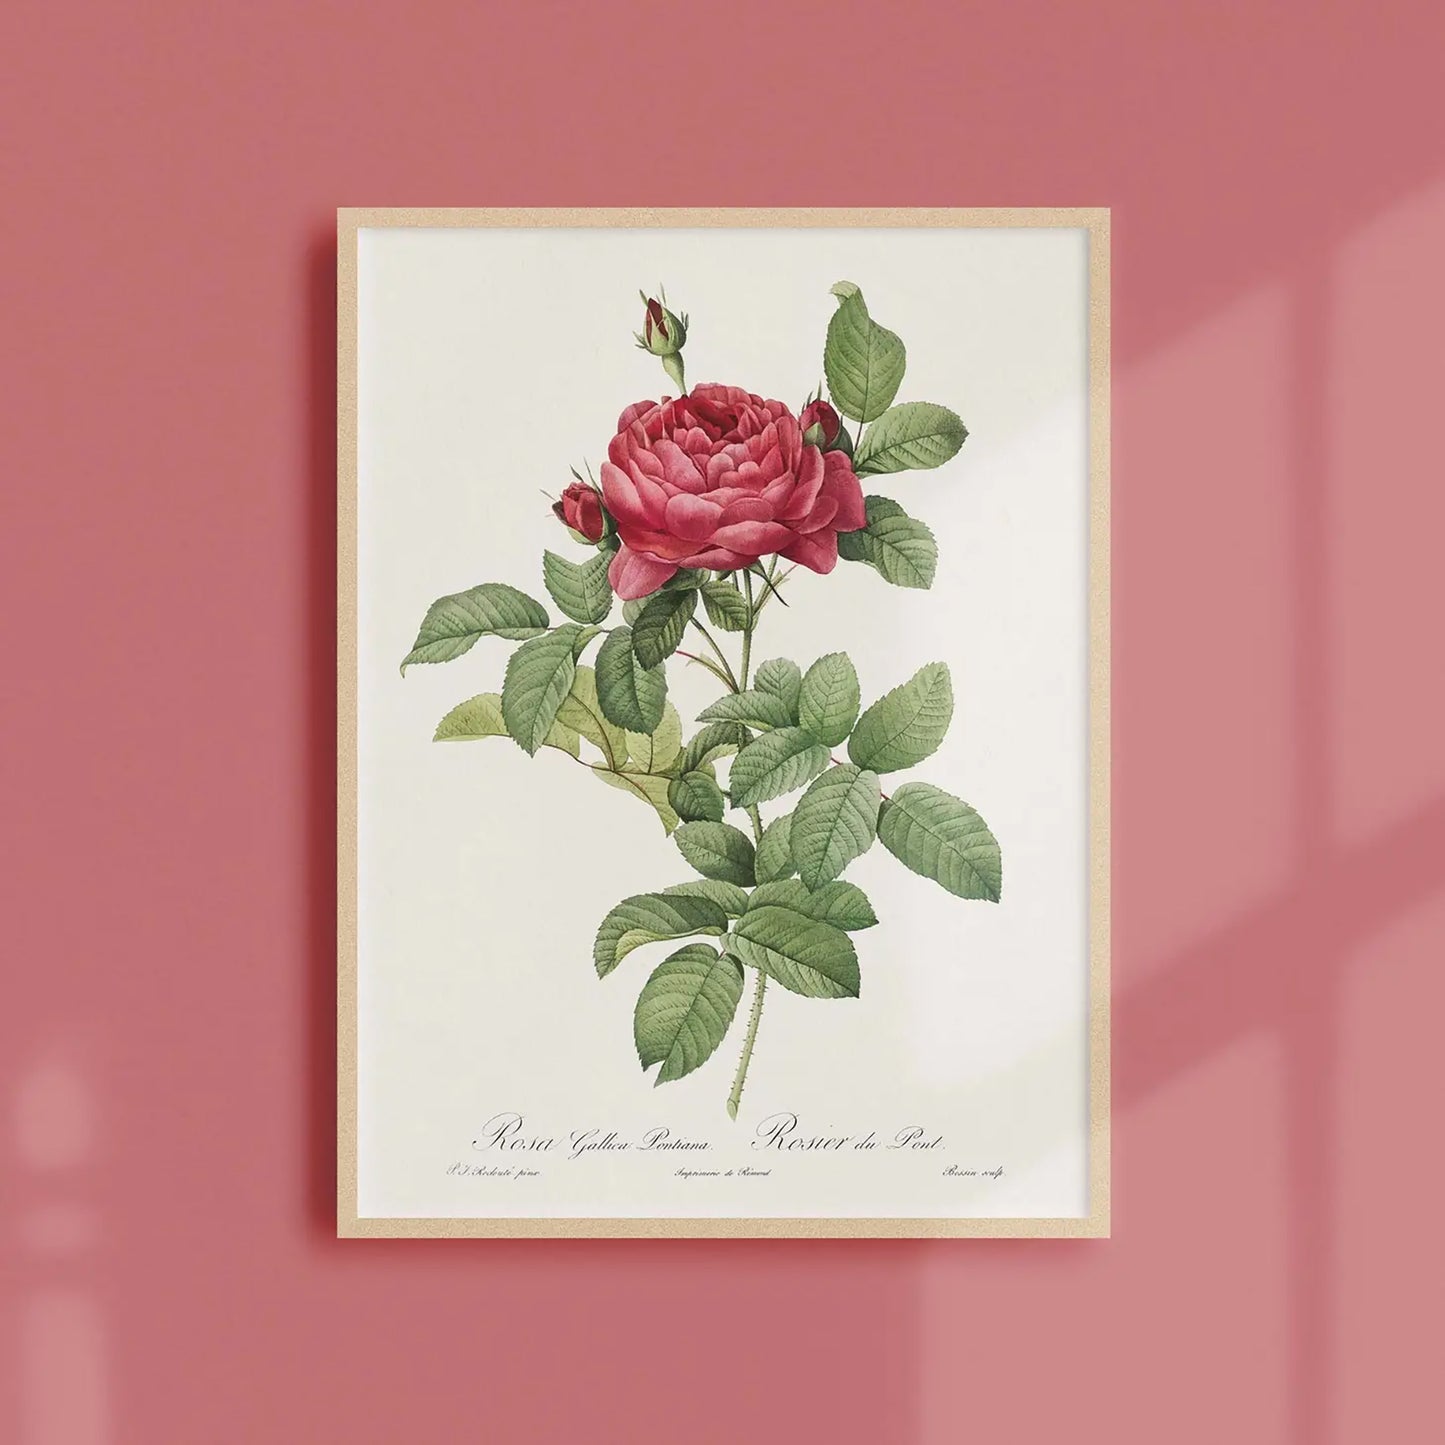 Generosa Home and Living Reproduction of a botanical drawing from the book "les roses" published in 1817 and illustrated by the famous painter and botanist pierre-joseph redouté.